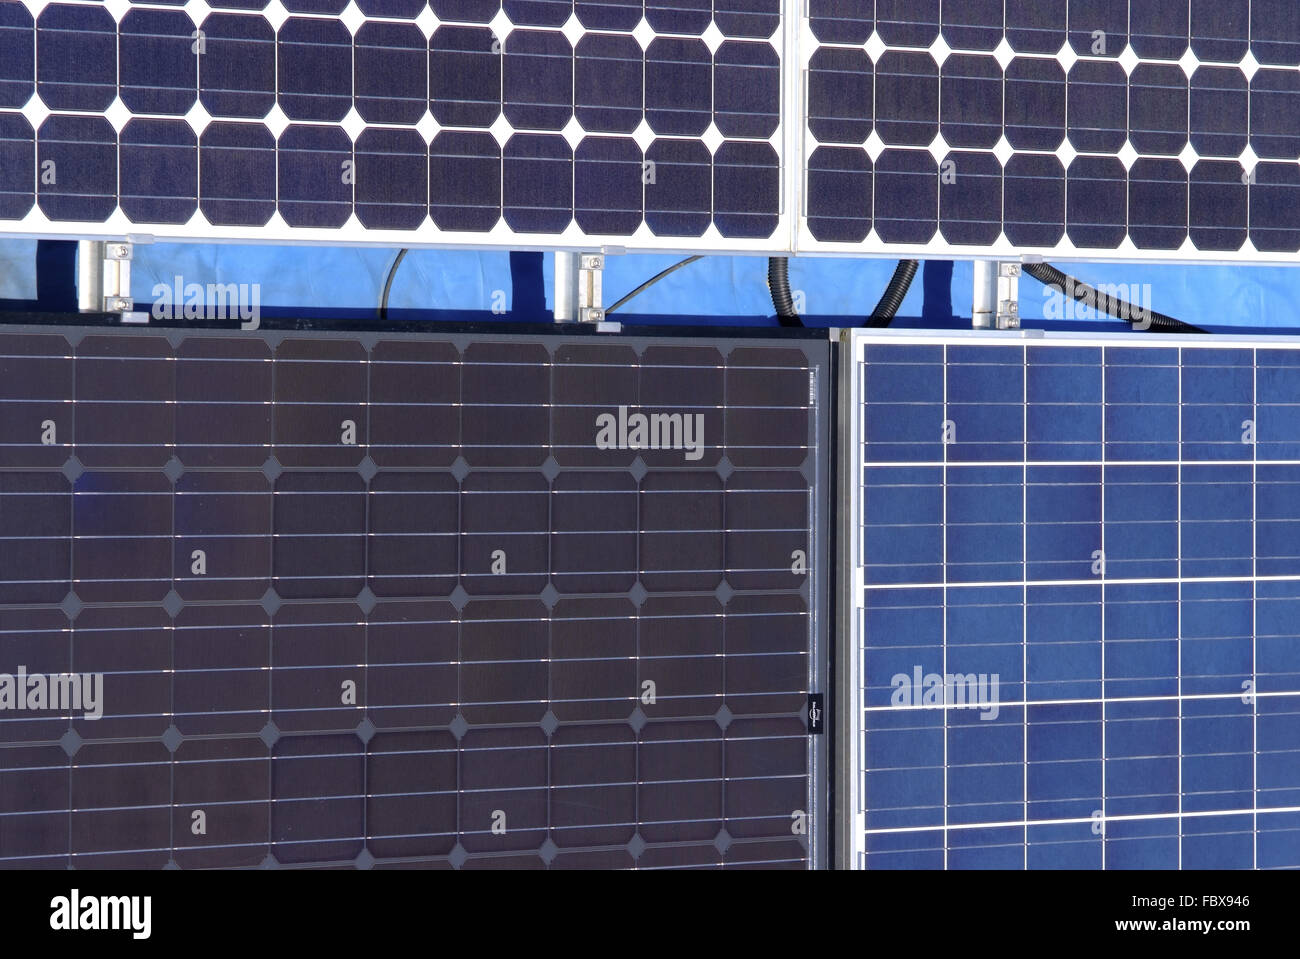 Different solar panel surfaces Stock Photo